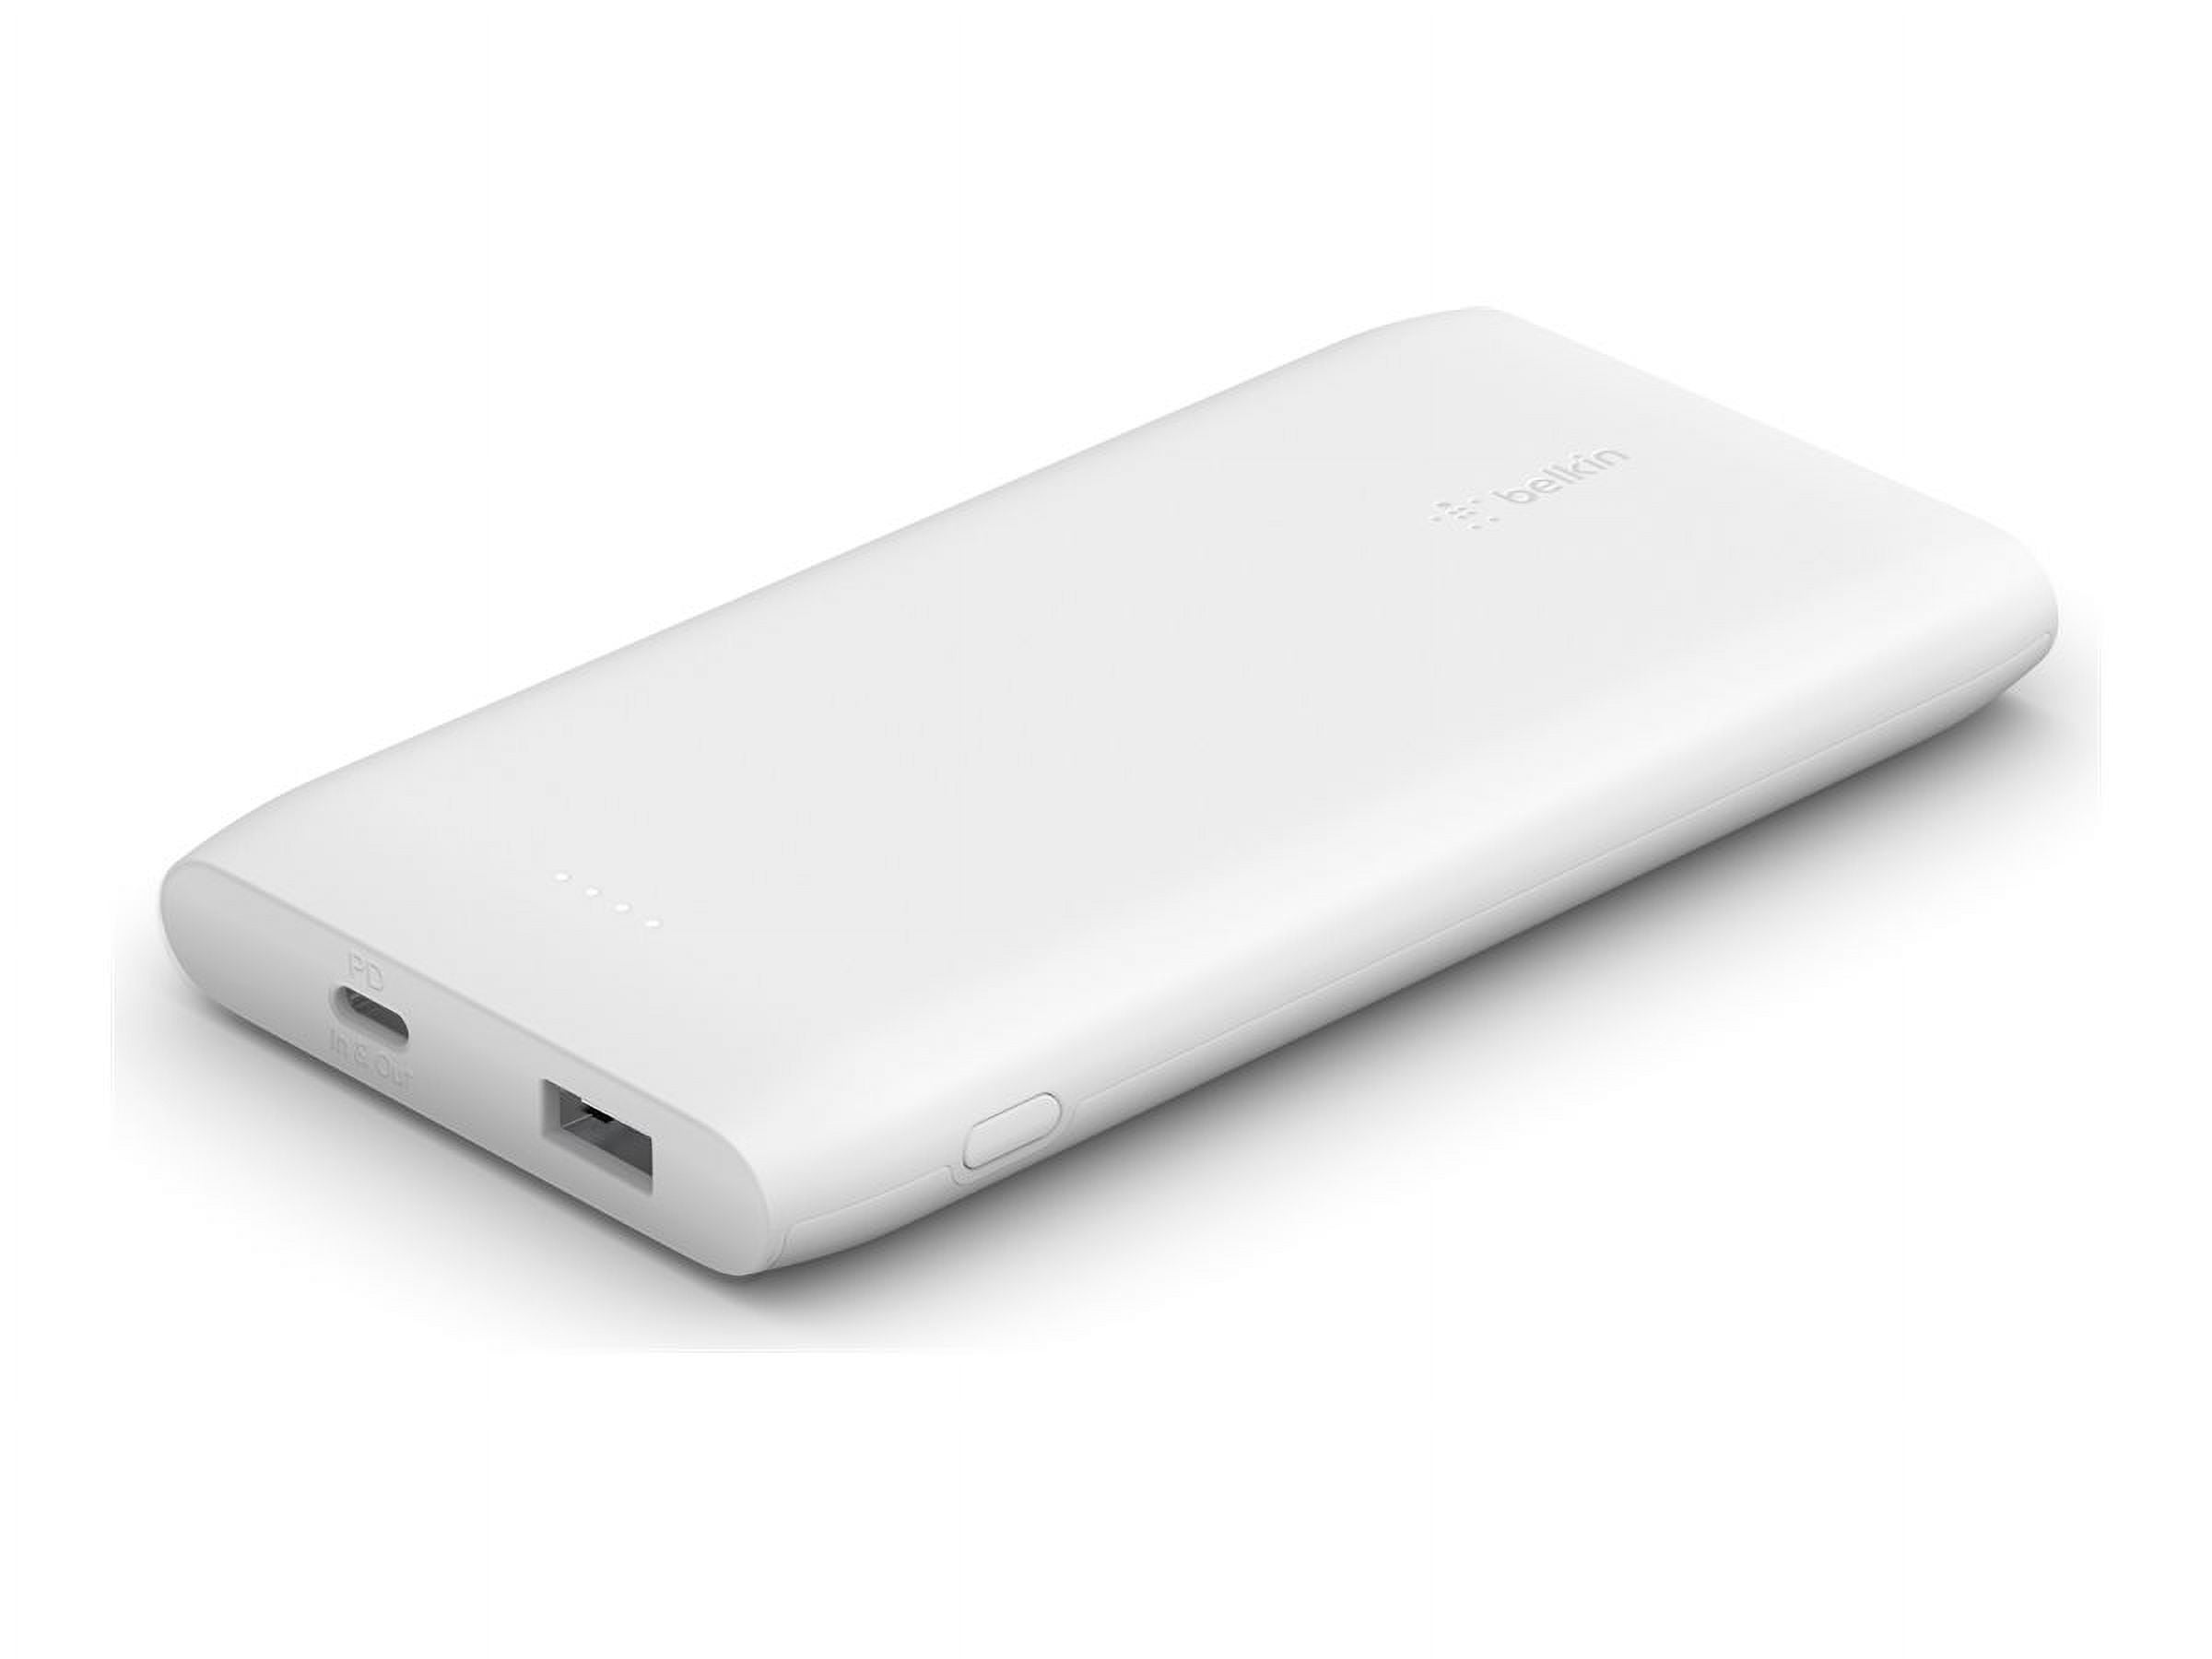 Belkin BoostCharge - Power bank - 10000 mAh - 18 Watt - Fast Charge, PD - 2  output connectors (USB, 24 pin USB-C) - white 